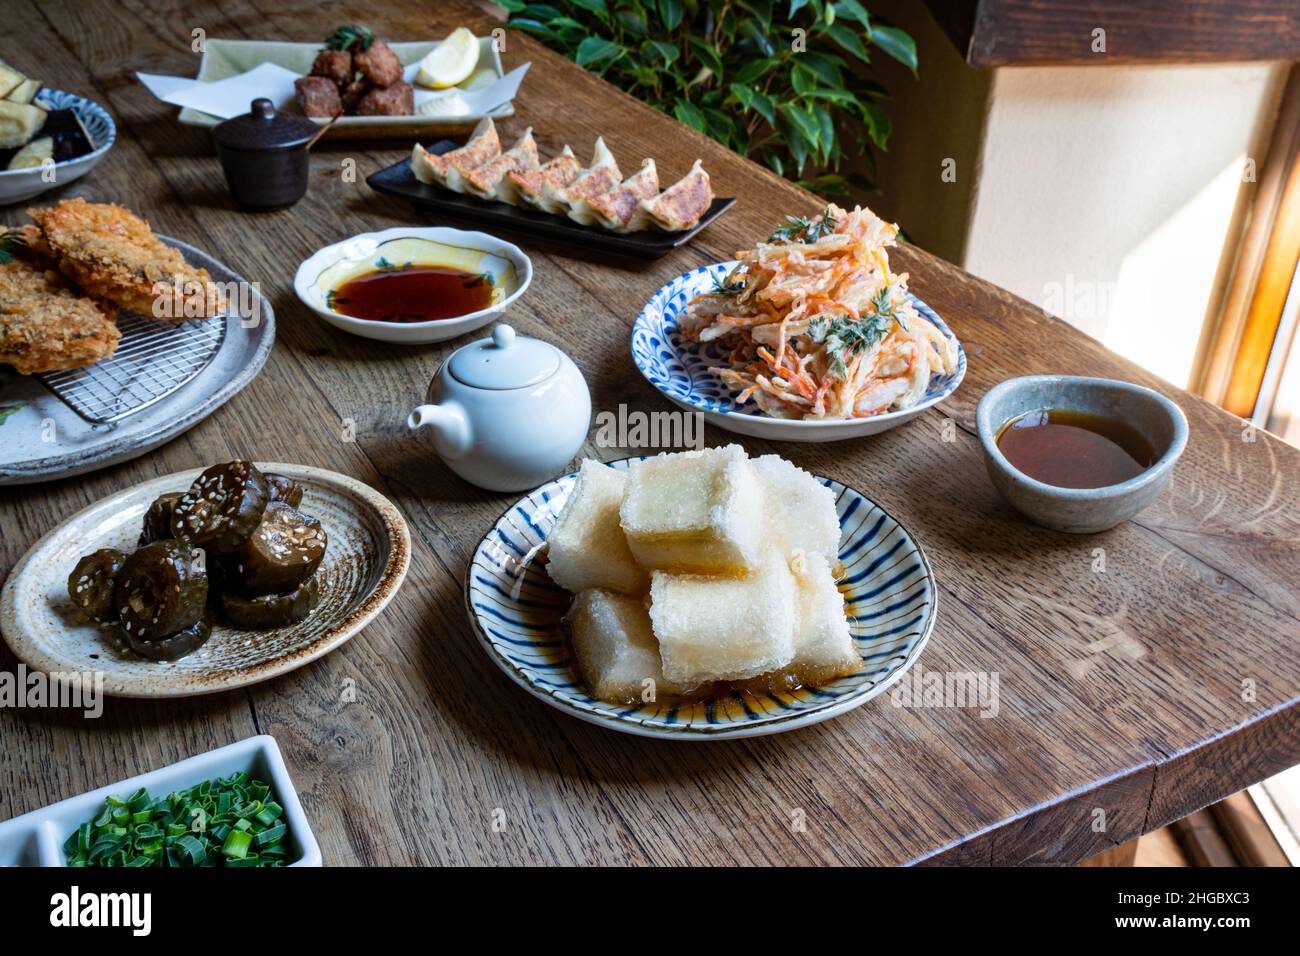 A variety of Japanese dishes on a wooden rustic table. Stock Photo